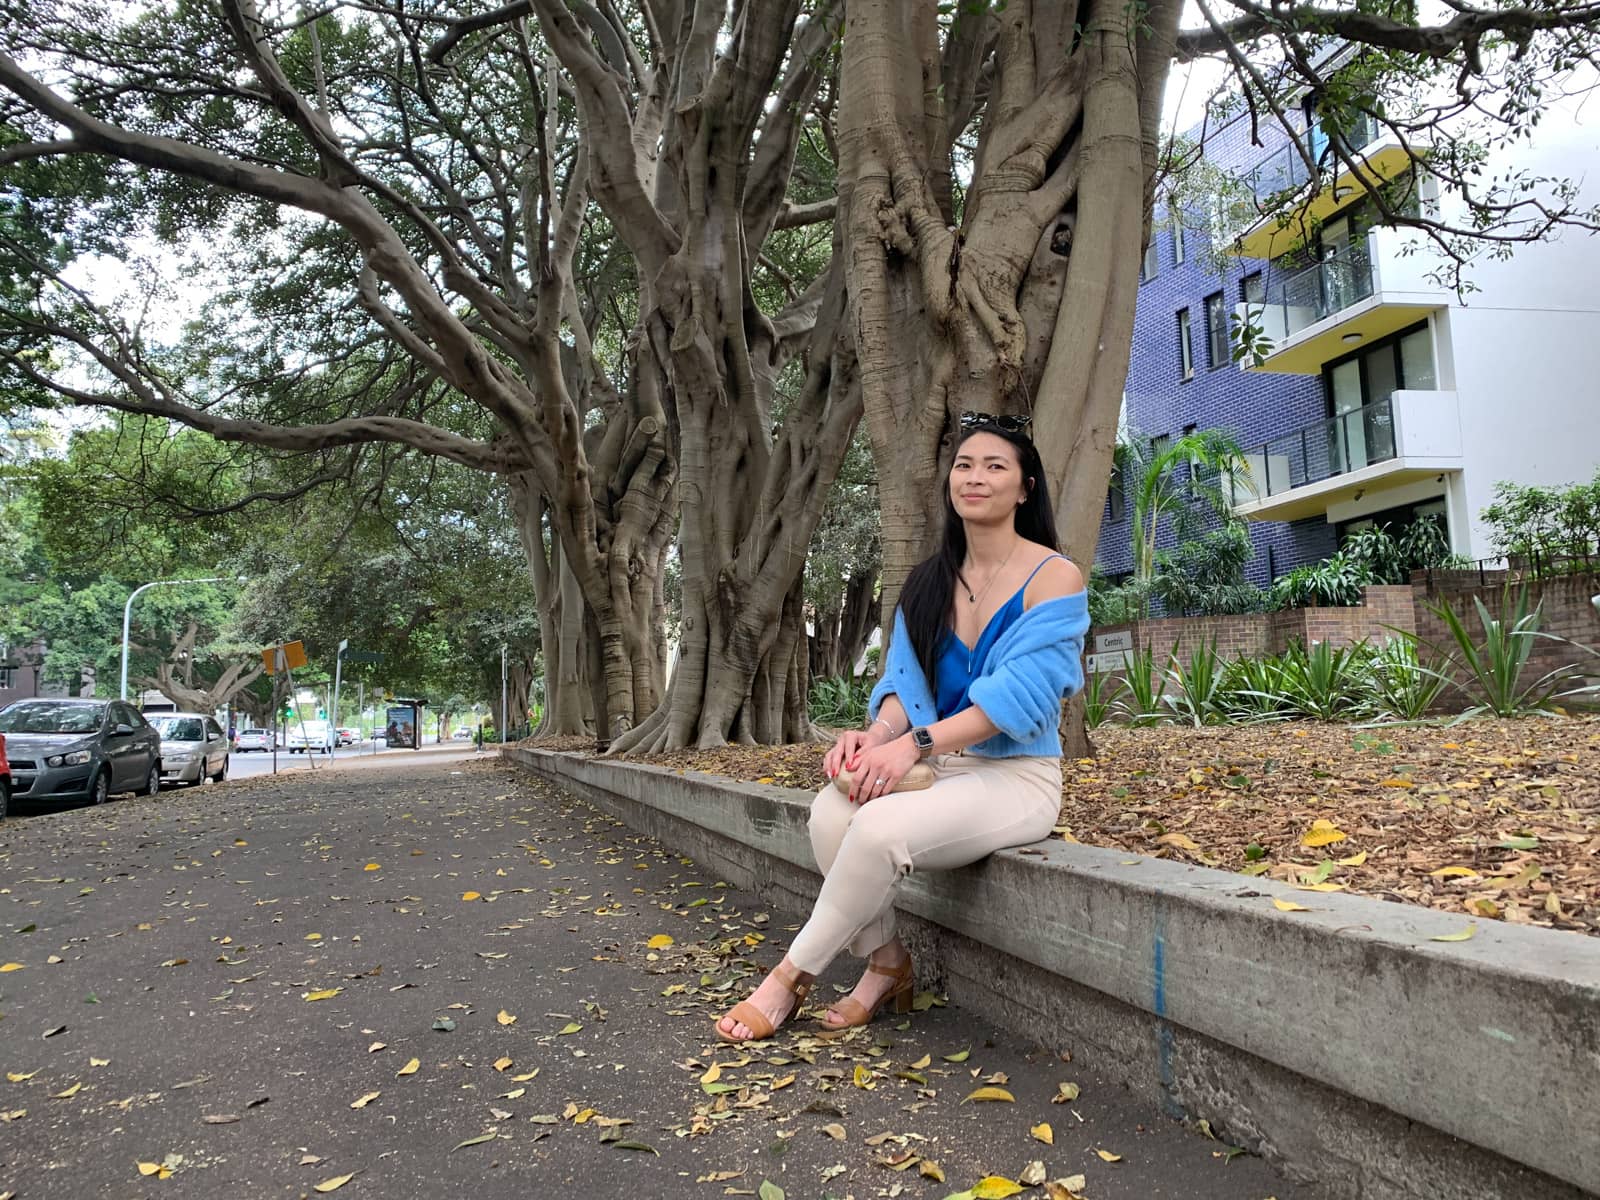 A woman with long dark hair sitting on a short wall at the end of a garden. She is wearing light pants, a blue top and a sky blue fluffy cardigan. In the background are apartment buildings and trees with large trunks.